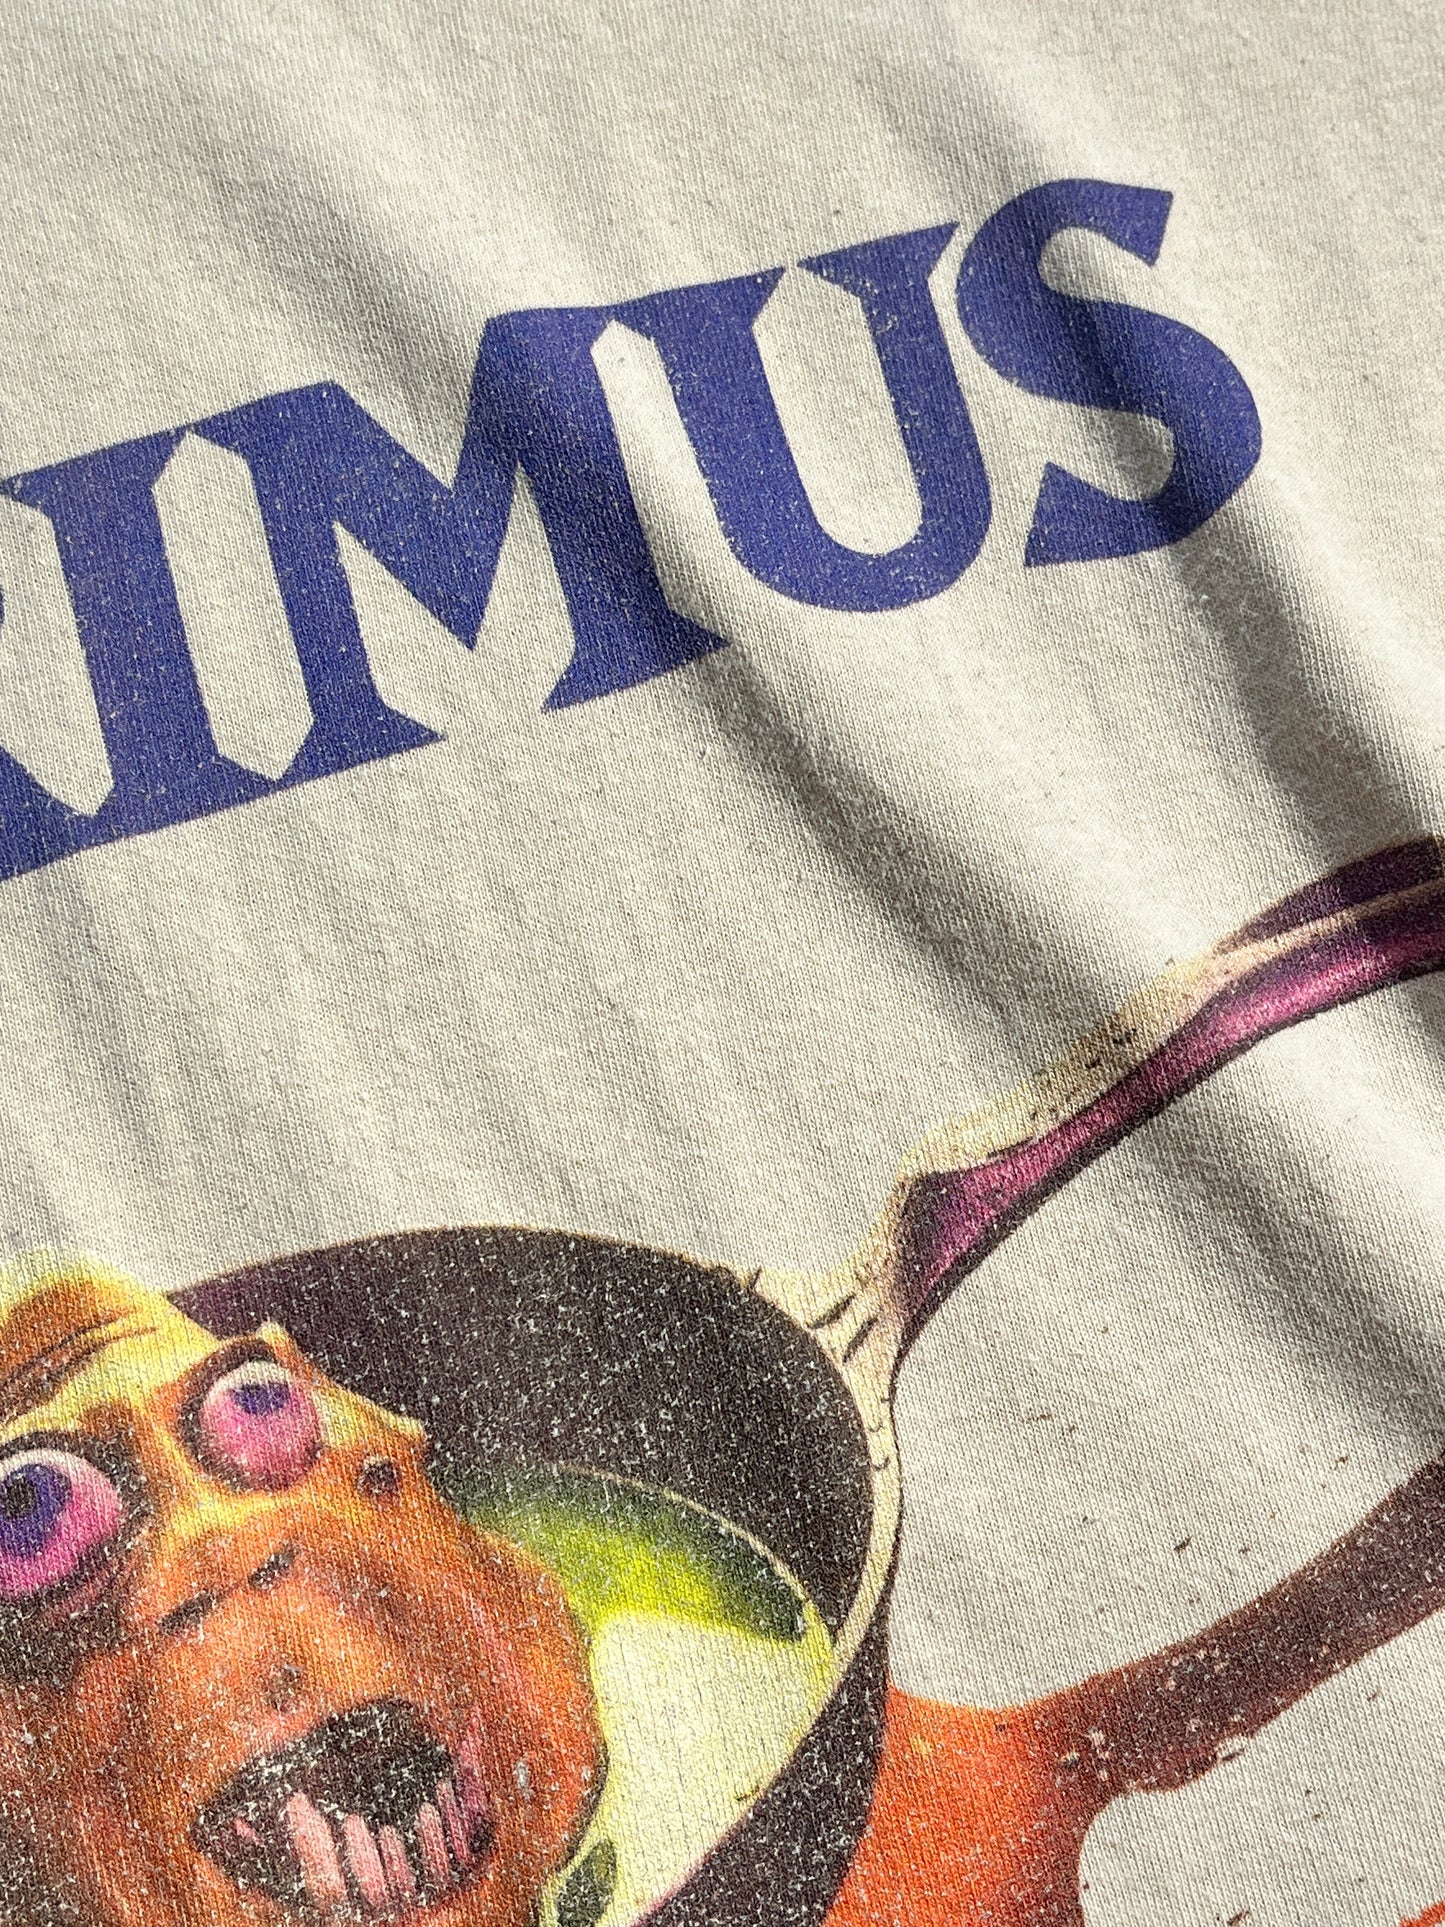 Vintage Primus T-Shirt Band Tee Frizzle Fry